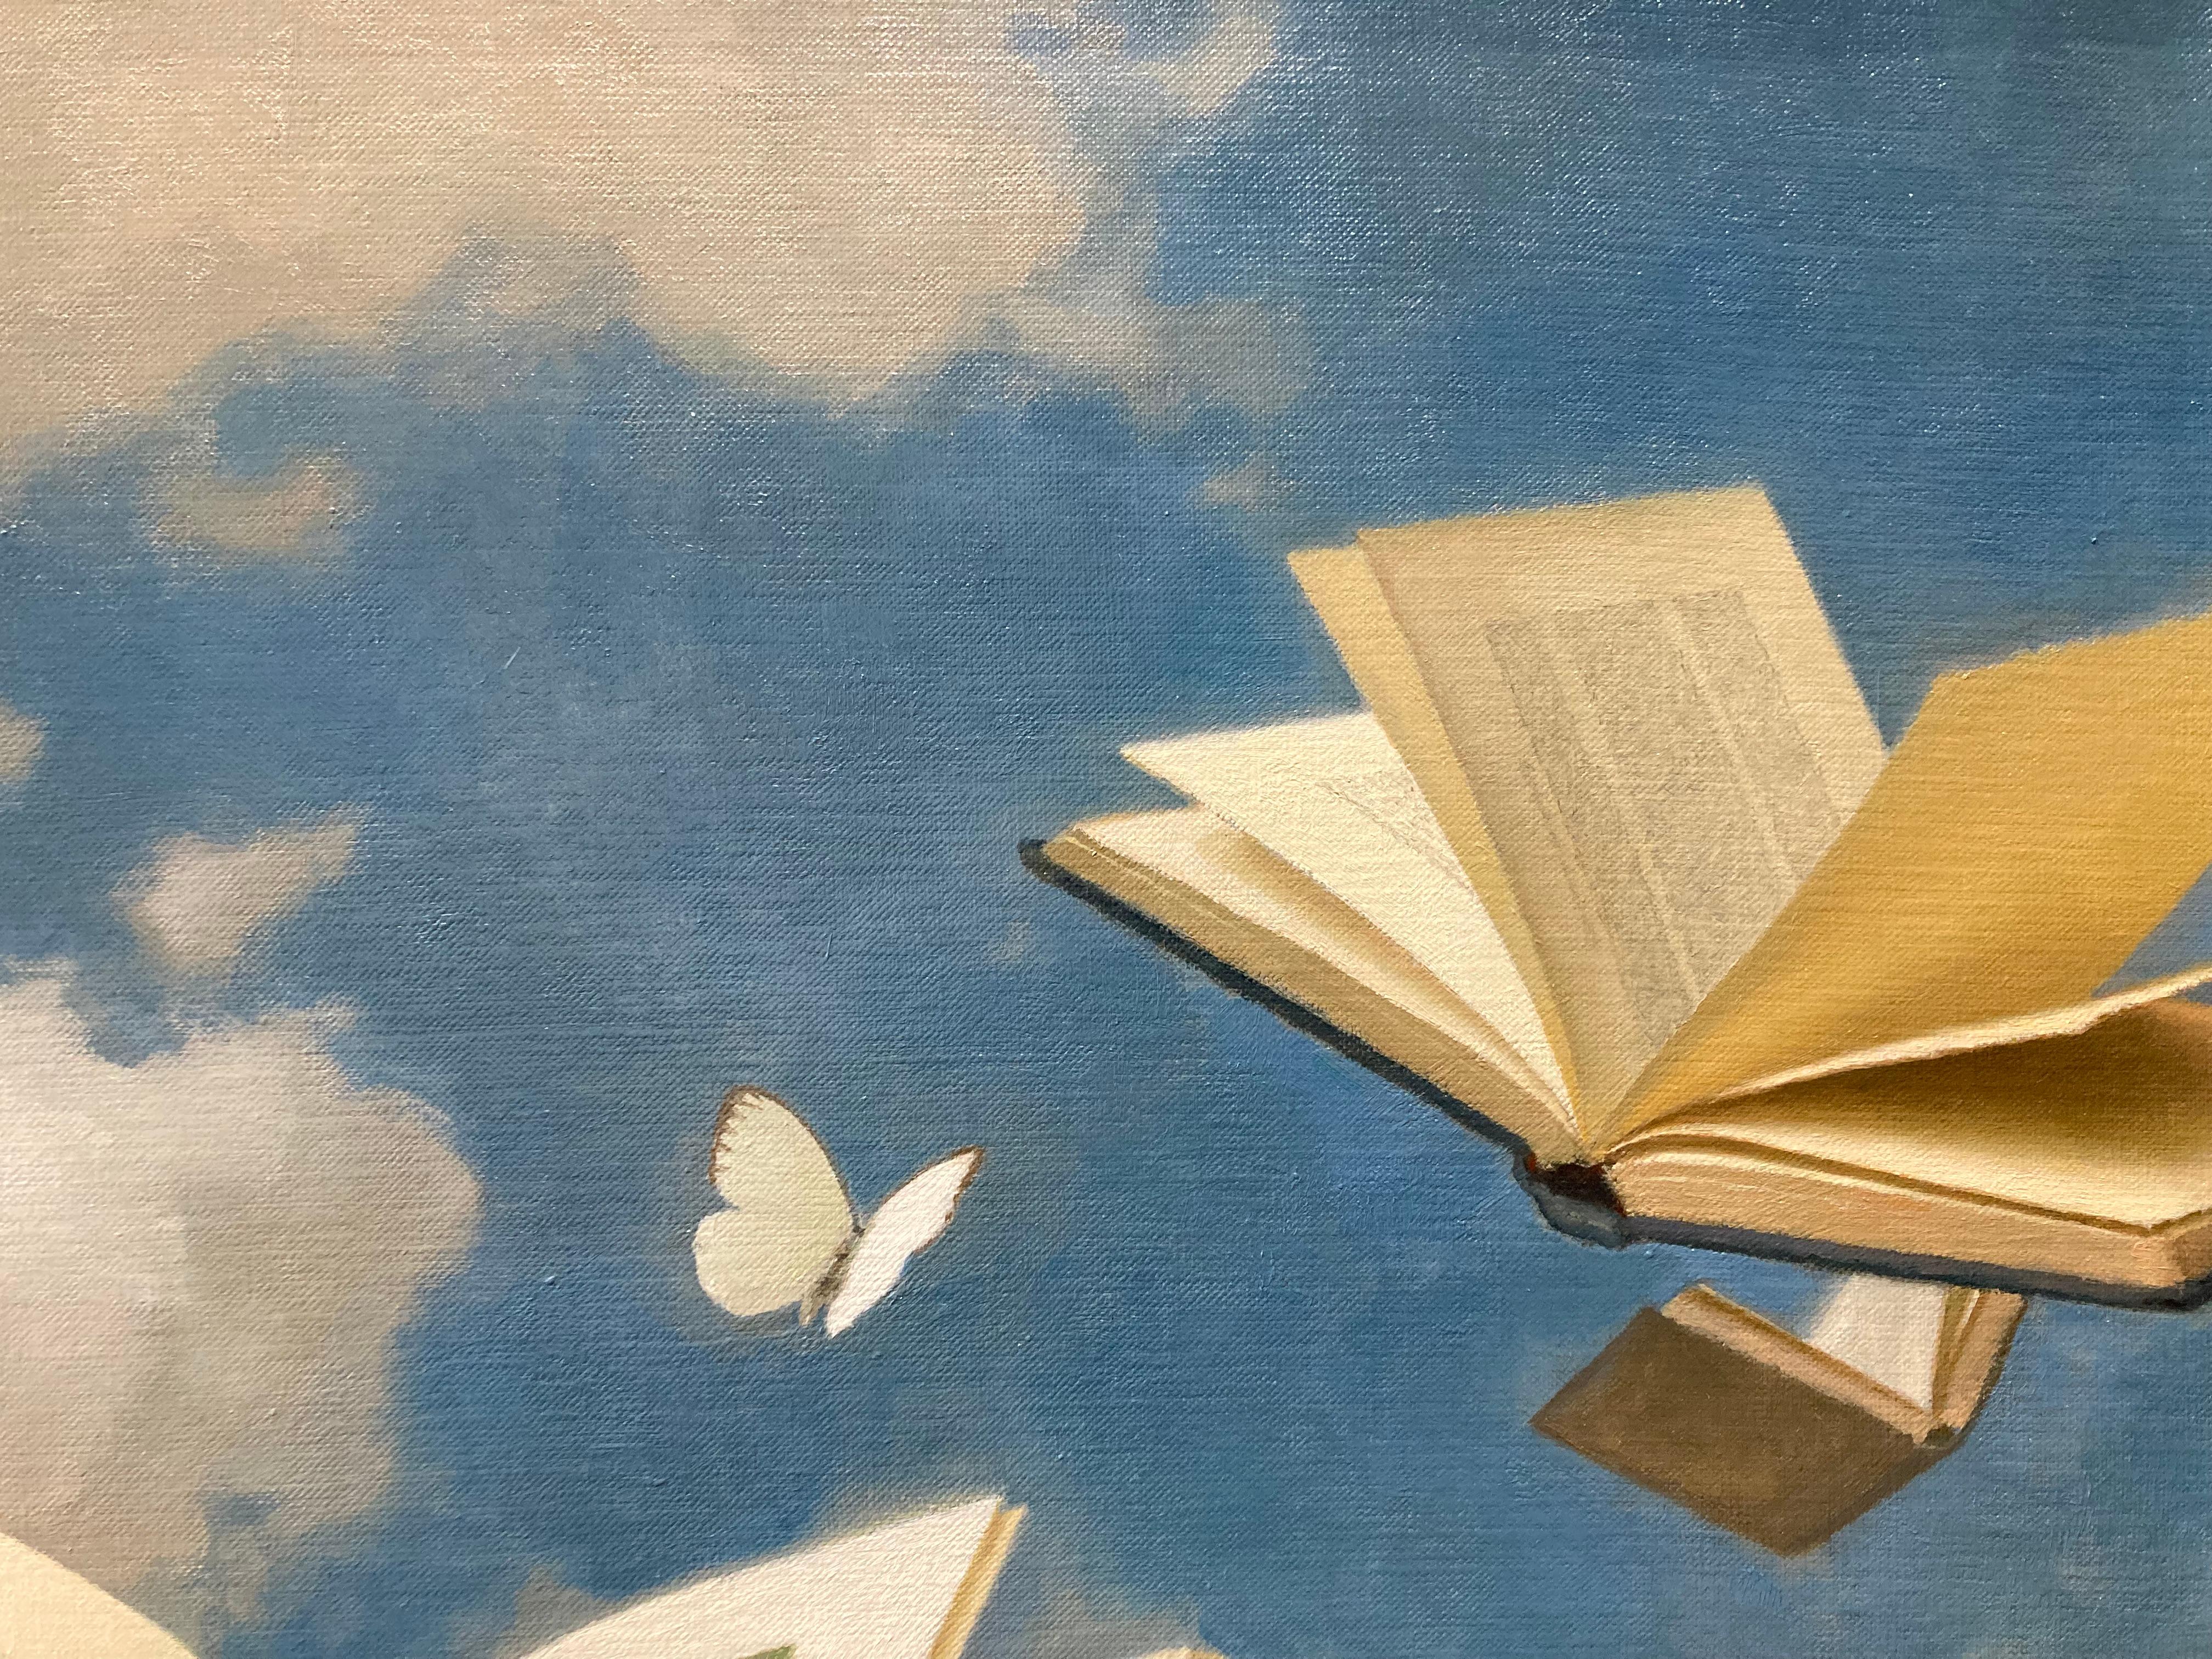 Floating Books and Butterflies - 2023 Surrealist still life and skyscape 4